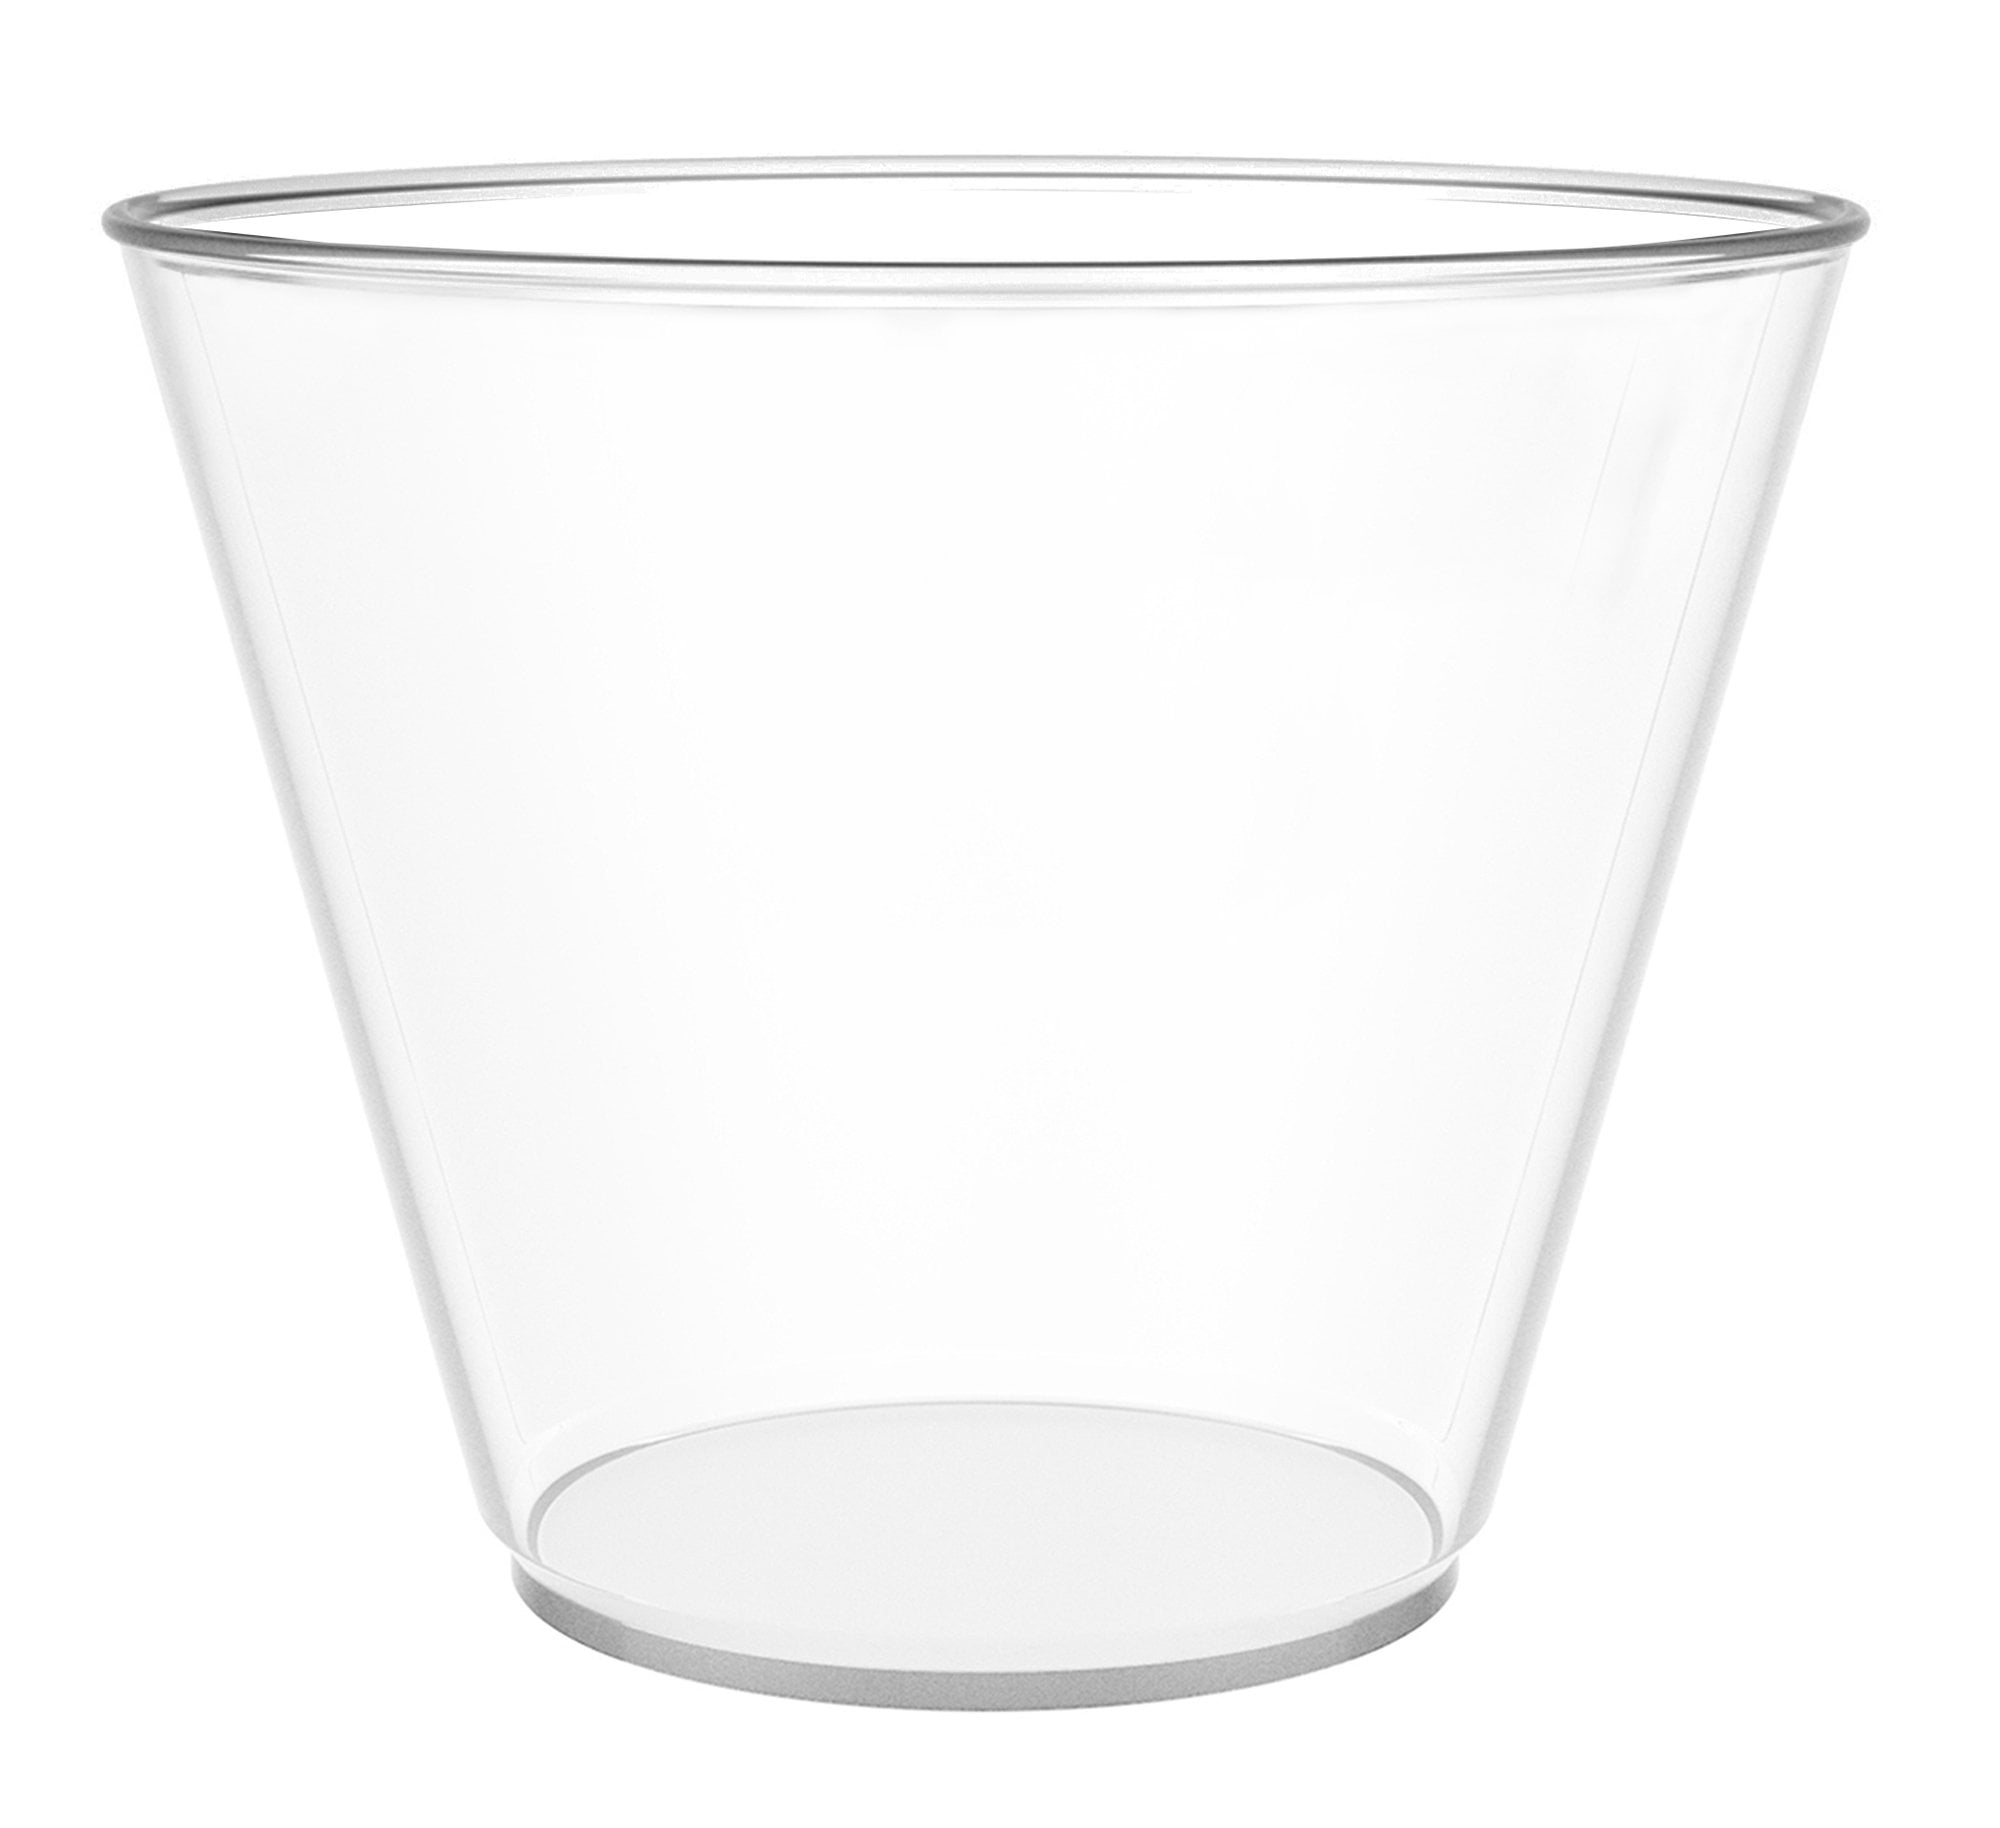 9 oz clear plastic cups